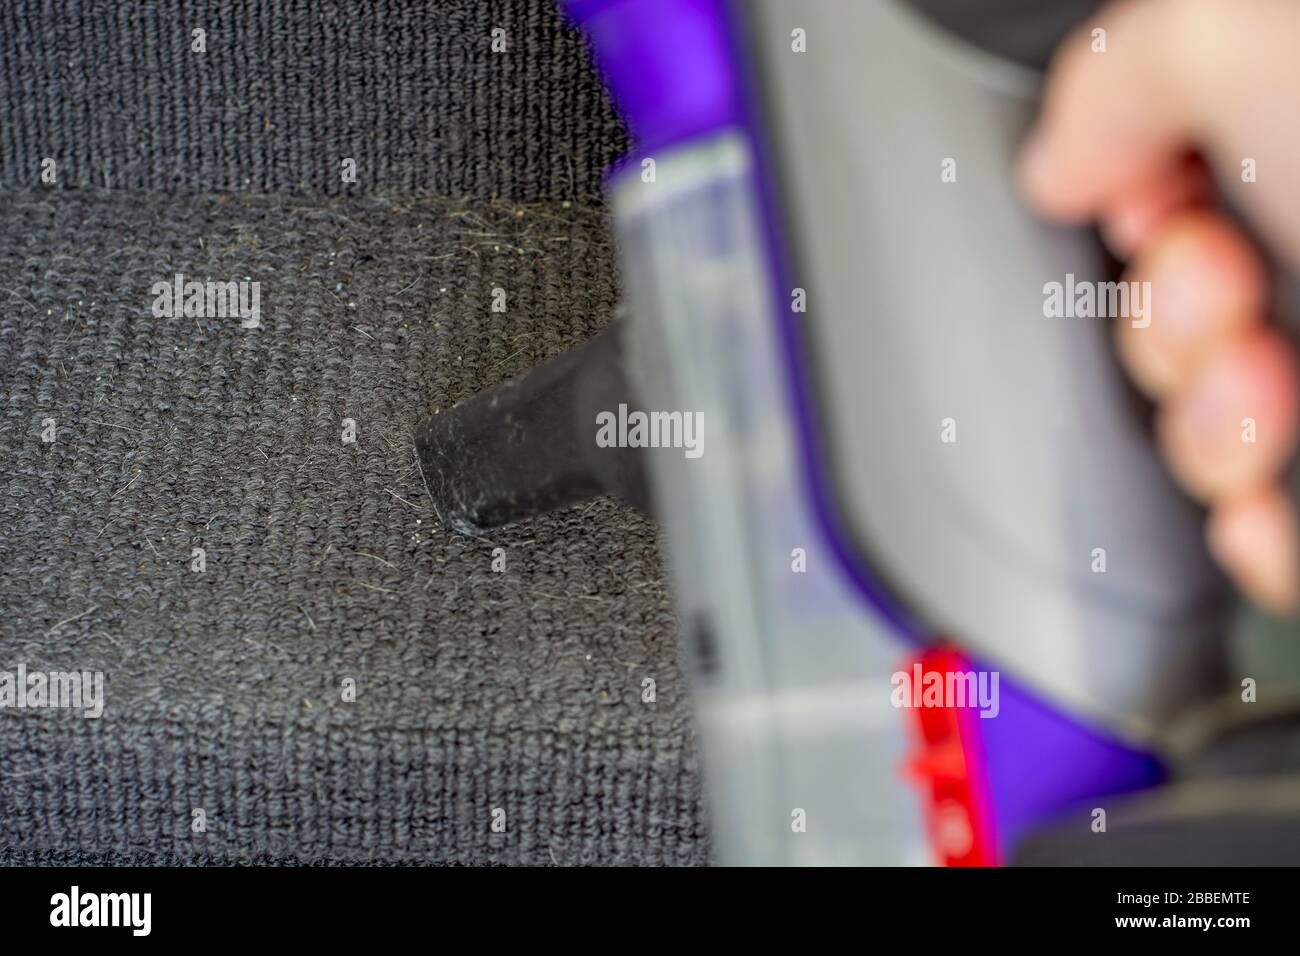 Hand holding a handheld vacuum cleaner to remove dirt from the stairs covered with carpet. Stock Photo